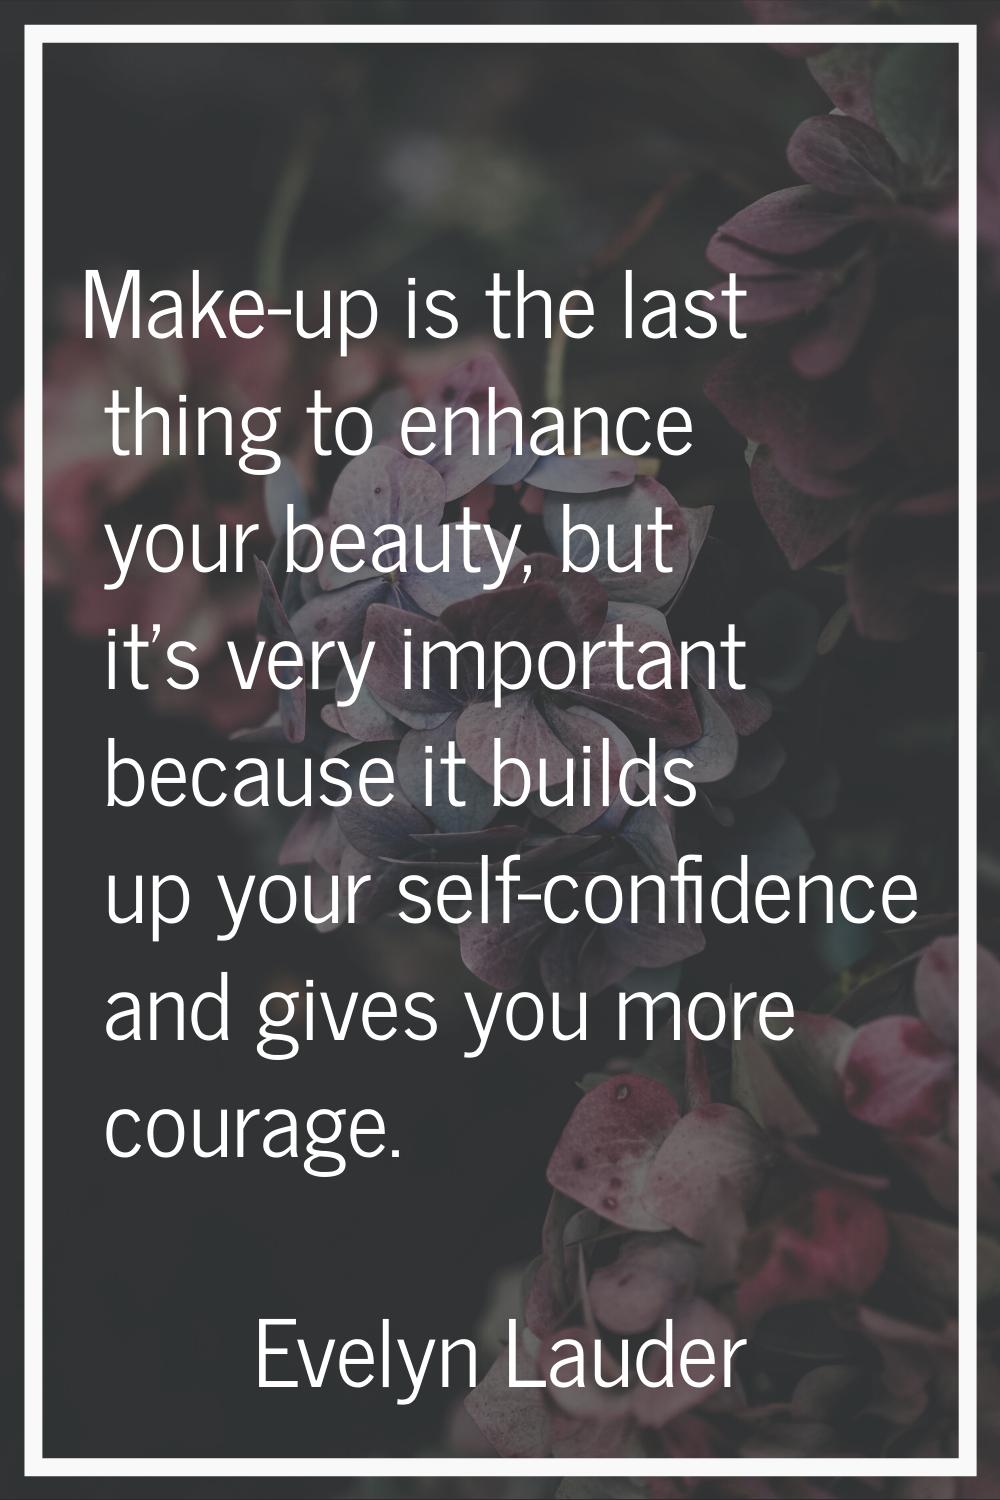 Make-up is the last thing to enhance your beauty, but it's very important because it builds up your